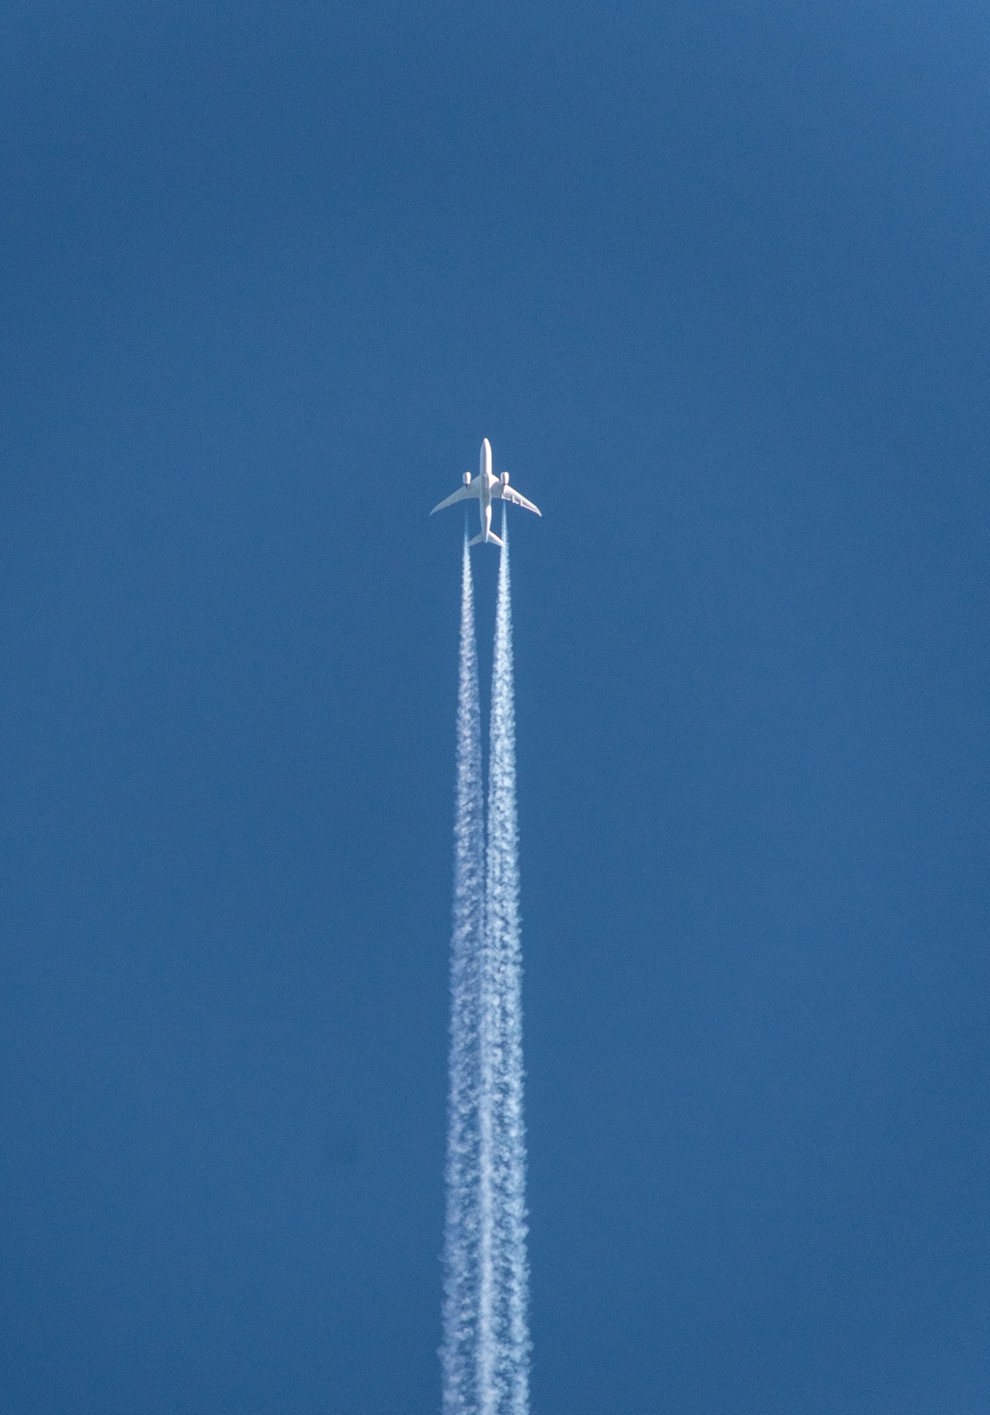 New report investigates the impact of UK carbon pricing on UK aviation